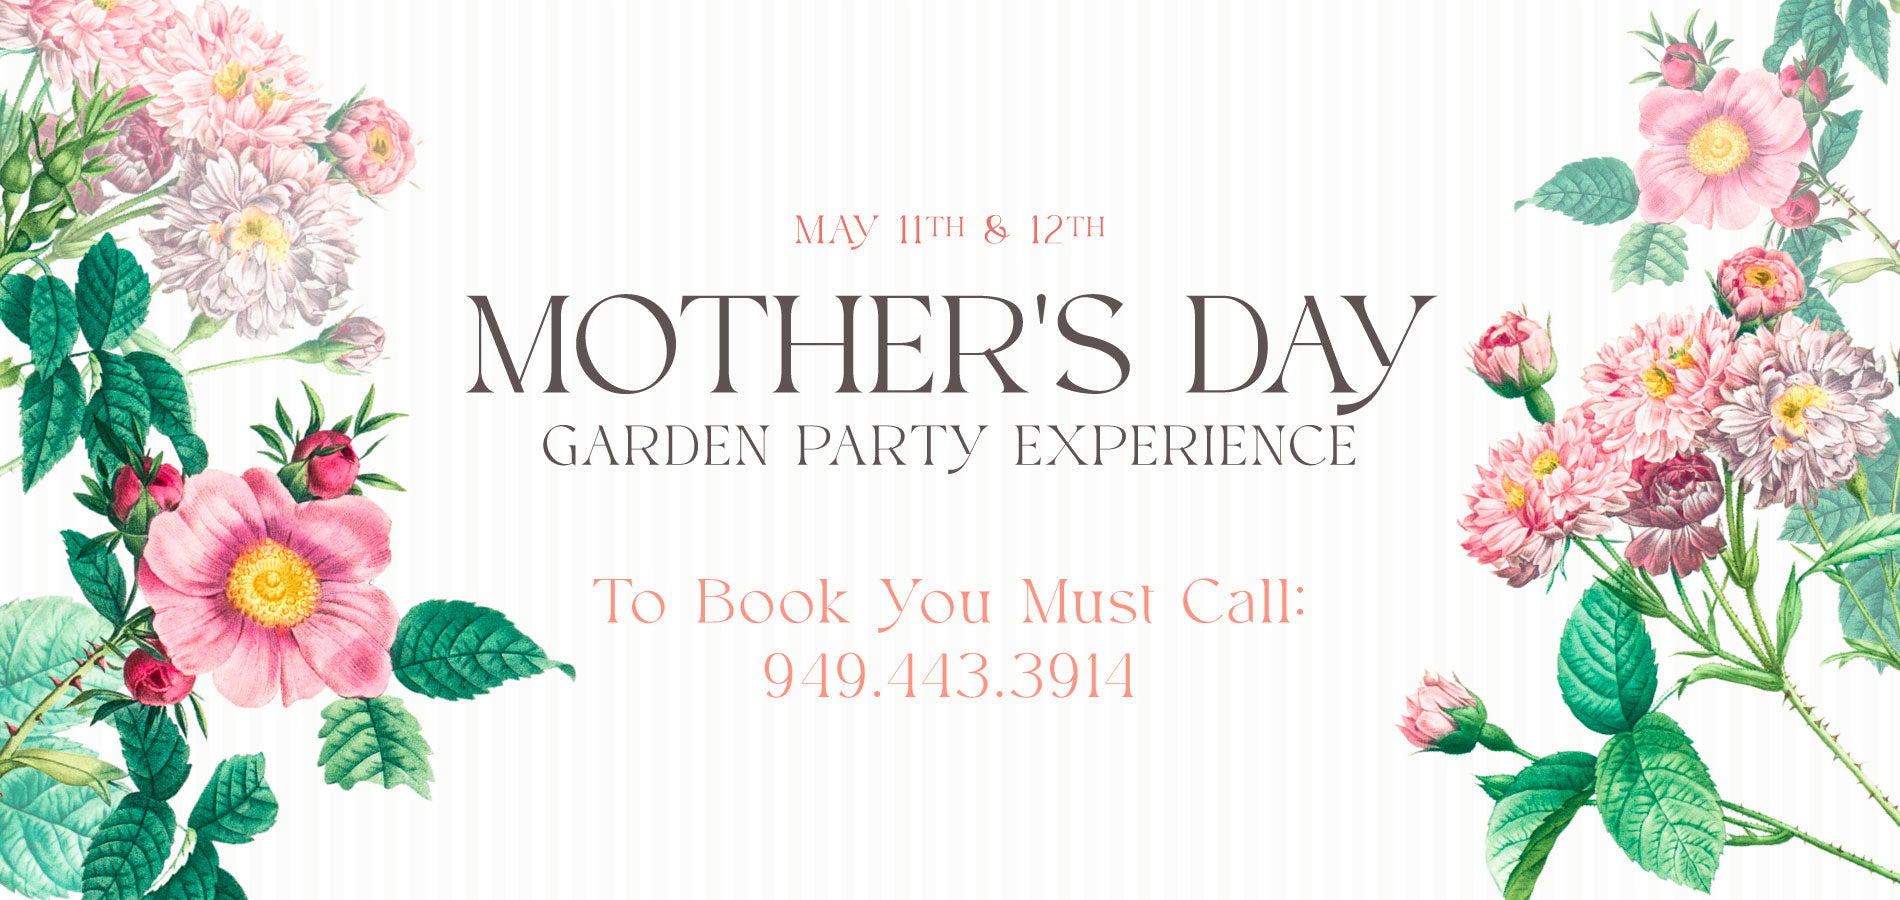 Mother's Day Garden Party